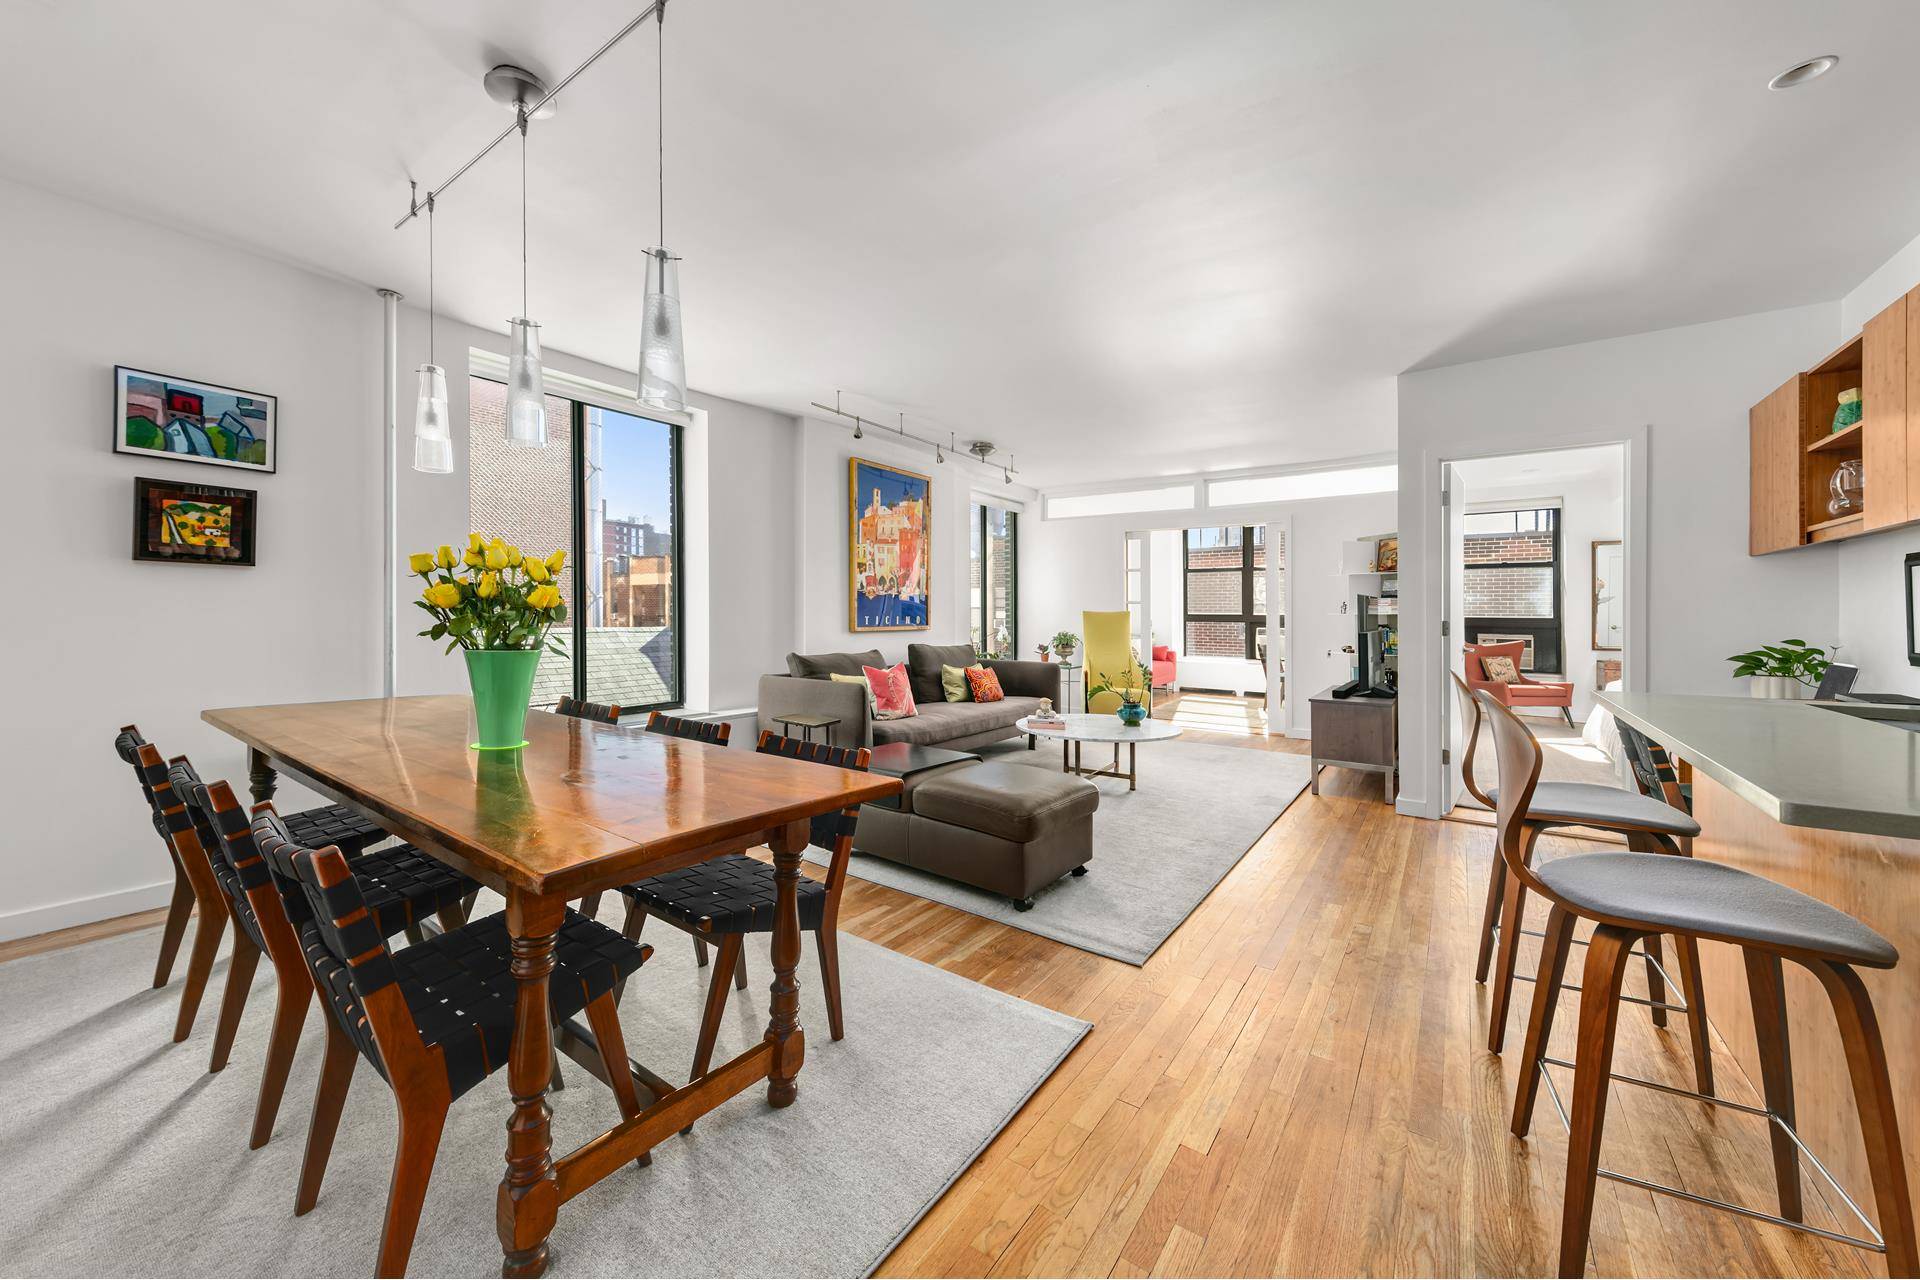 Welcome to Apartment 6C at the Arcadia, a loft like pre war Coop at 240 West 23rd Street in the heart of Chelsea.